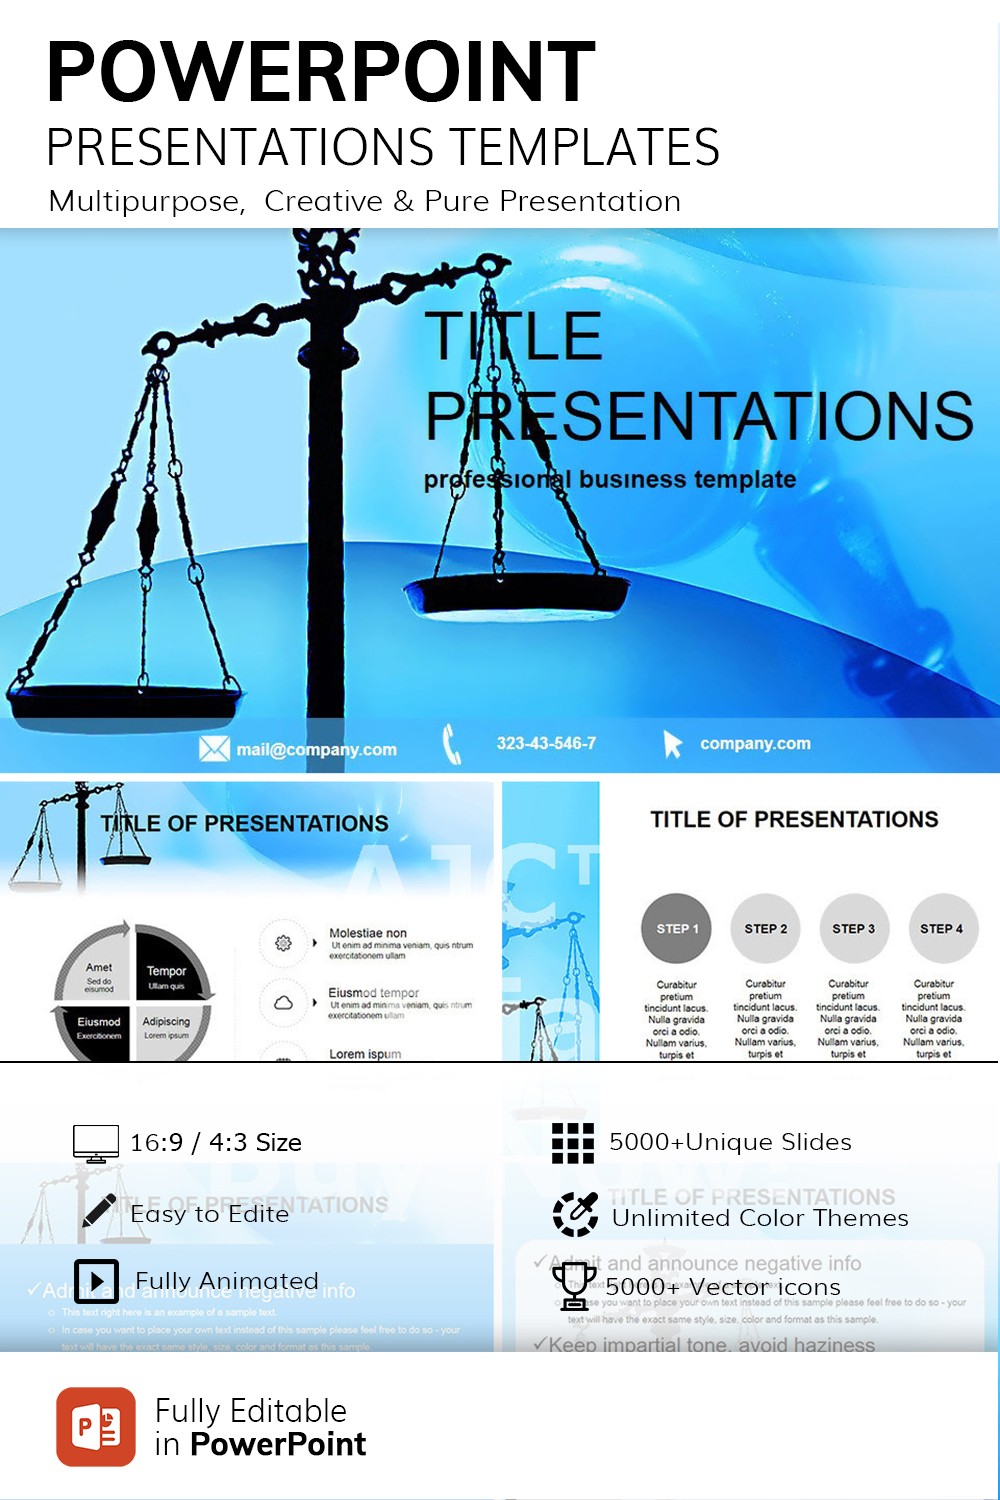 Justice court PowerPoint Template